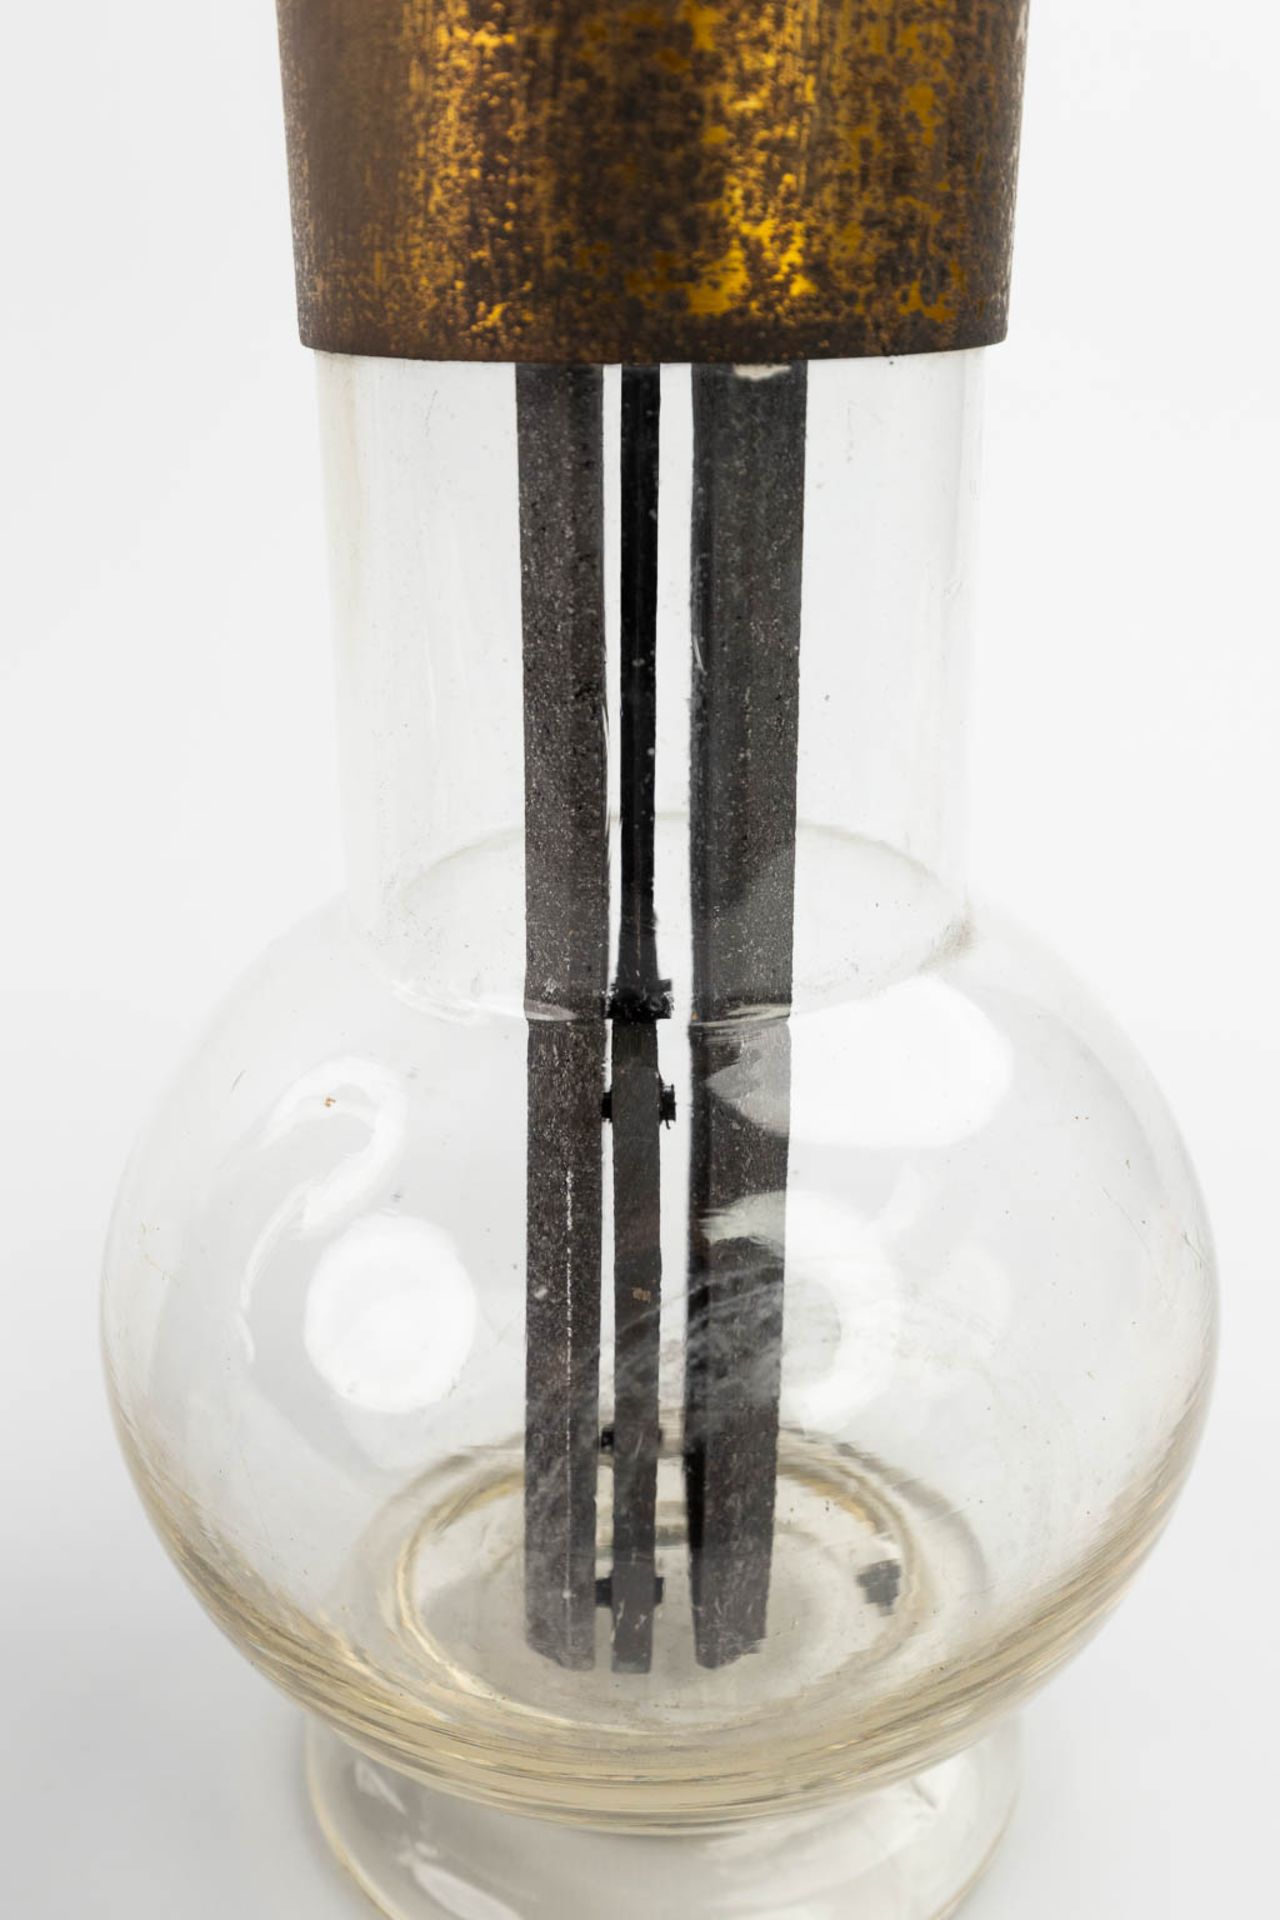 A collection of 3 'Grenet Cell' batteries made of glass. (H:30 x D:14 cm) - Image 8 of 14